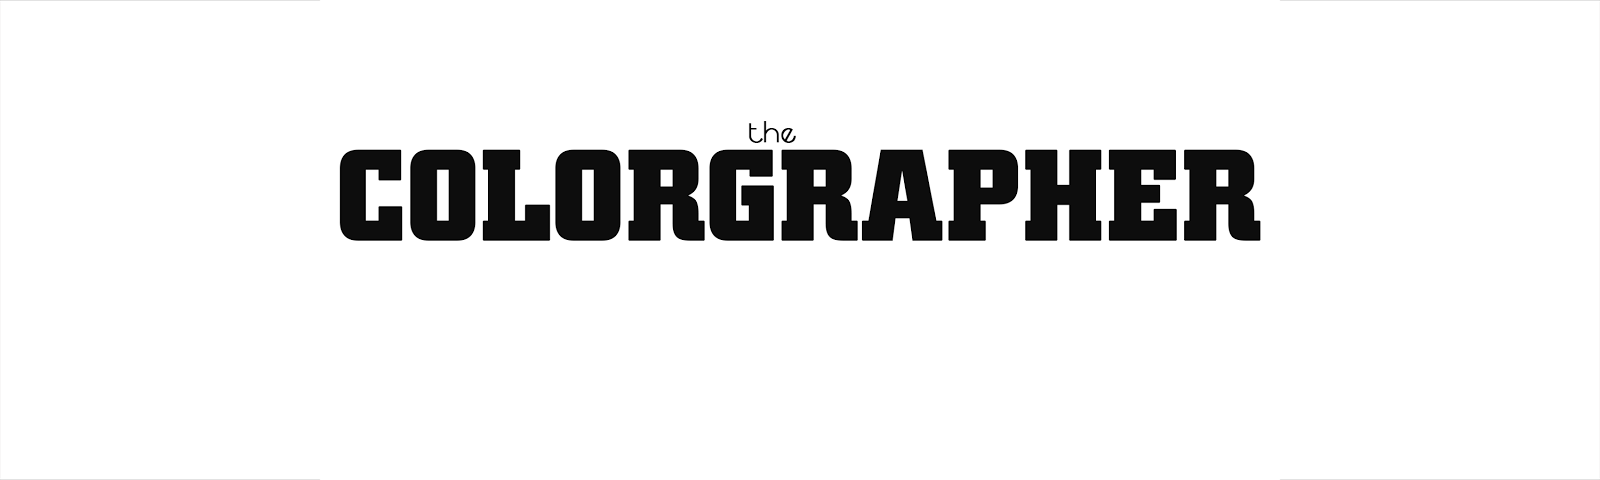 THE COLORGRAPHER